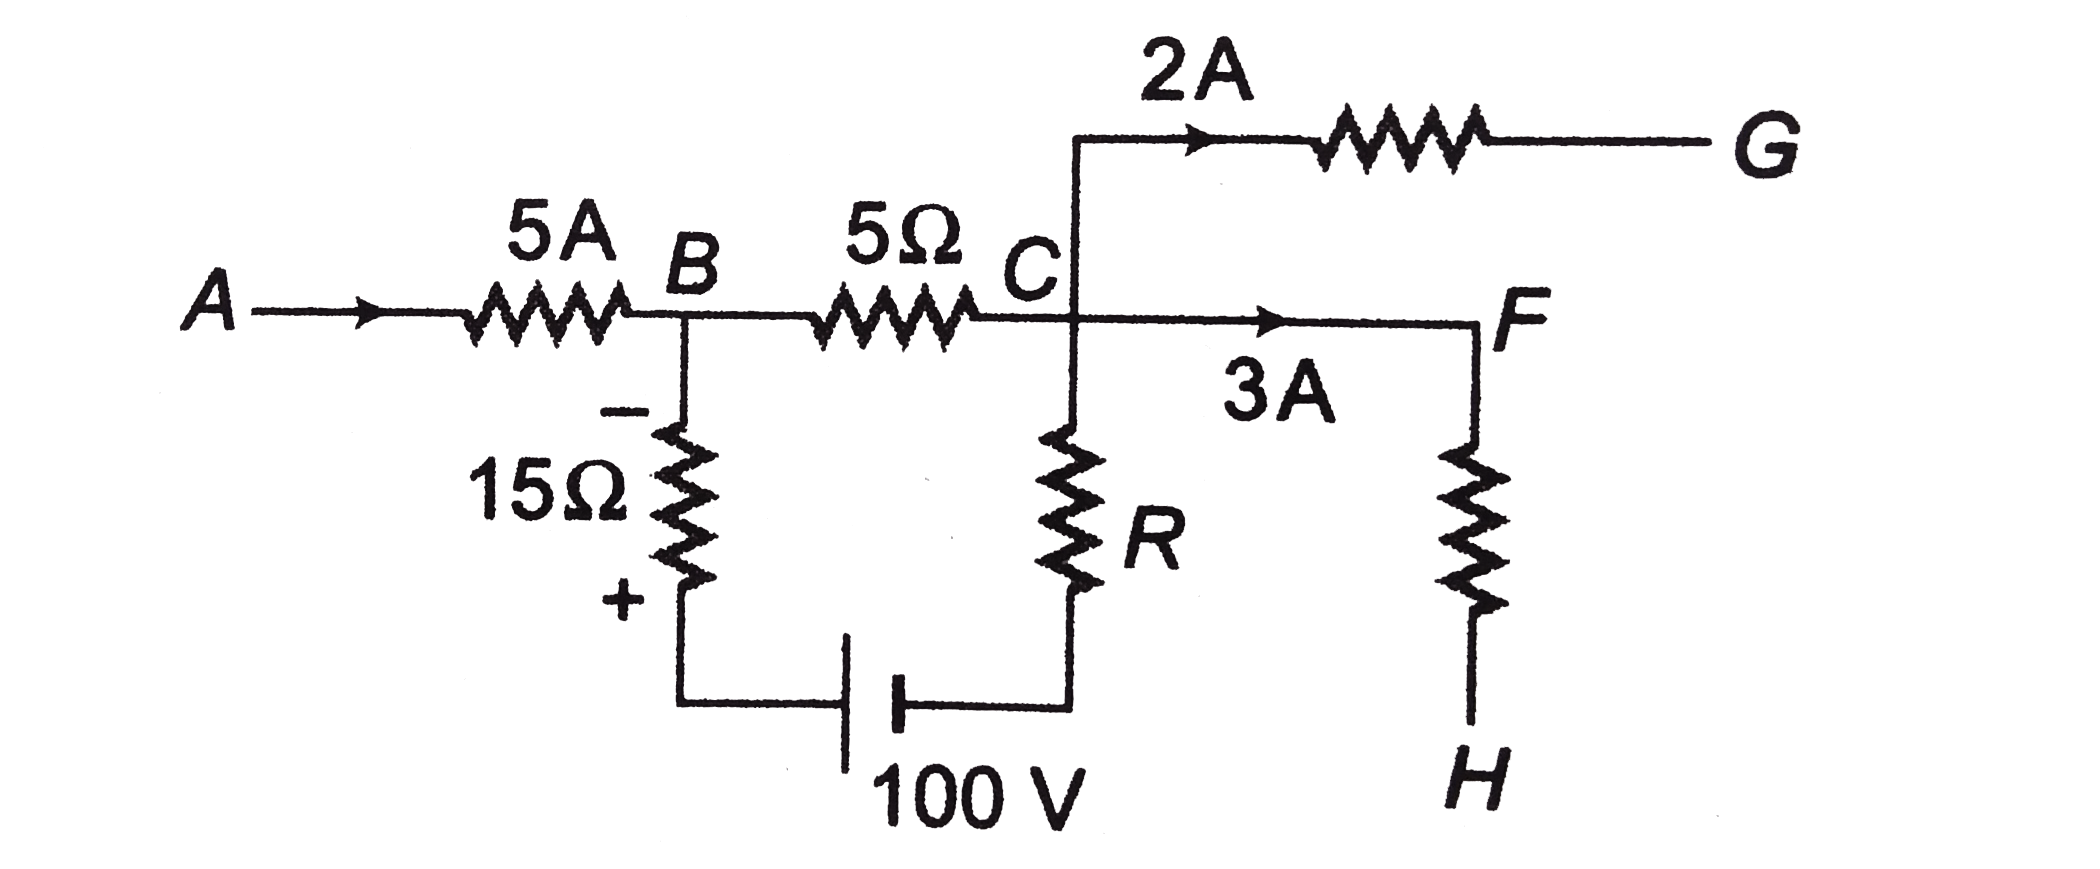 In the circuit shown the voltage drop across the 15Omega resistor is 30 V having the polarity as indicated. The ratio of potential difference across 5Omega and resistance R is